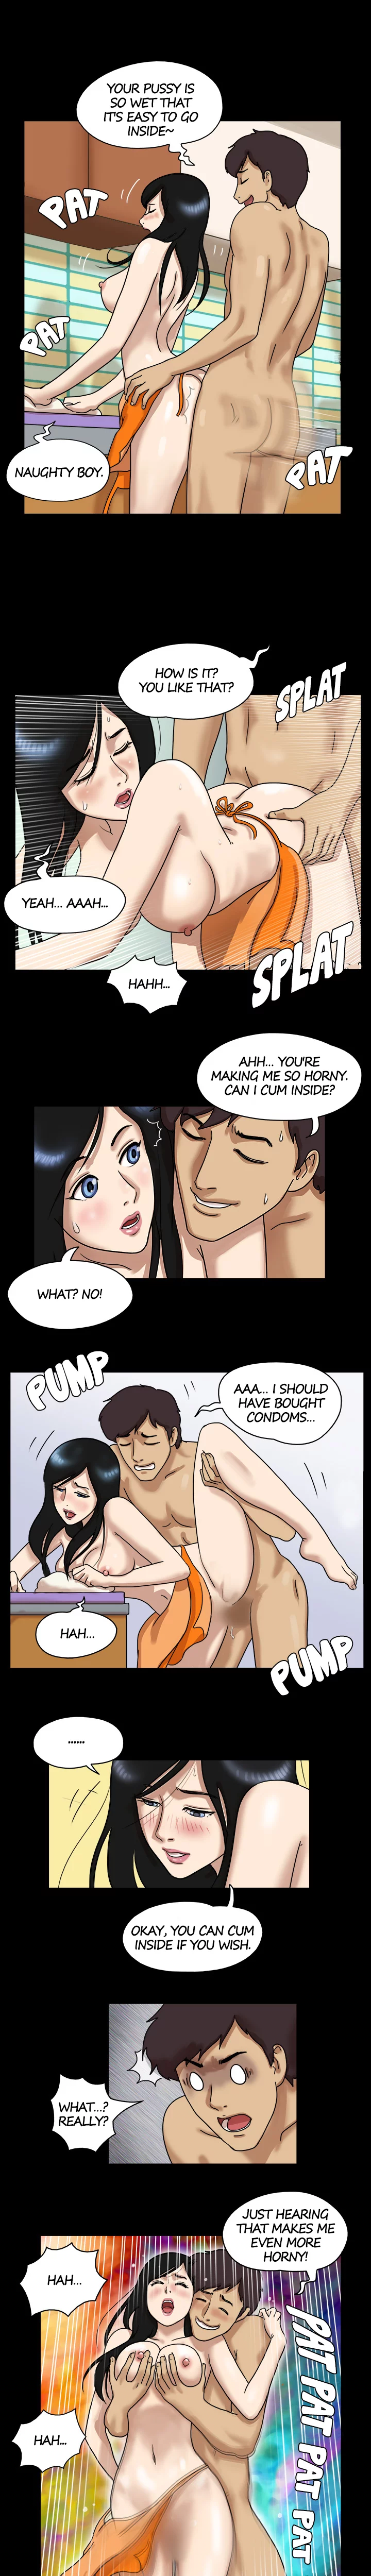 17 Sex Fantasies - Chapter 12 Page 2